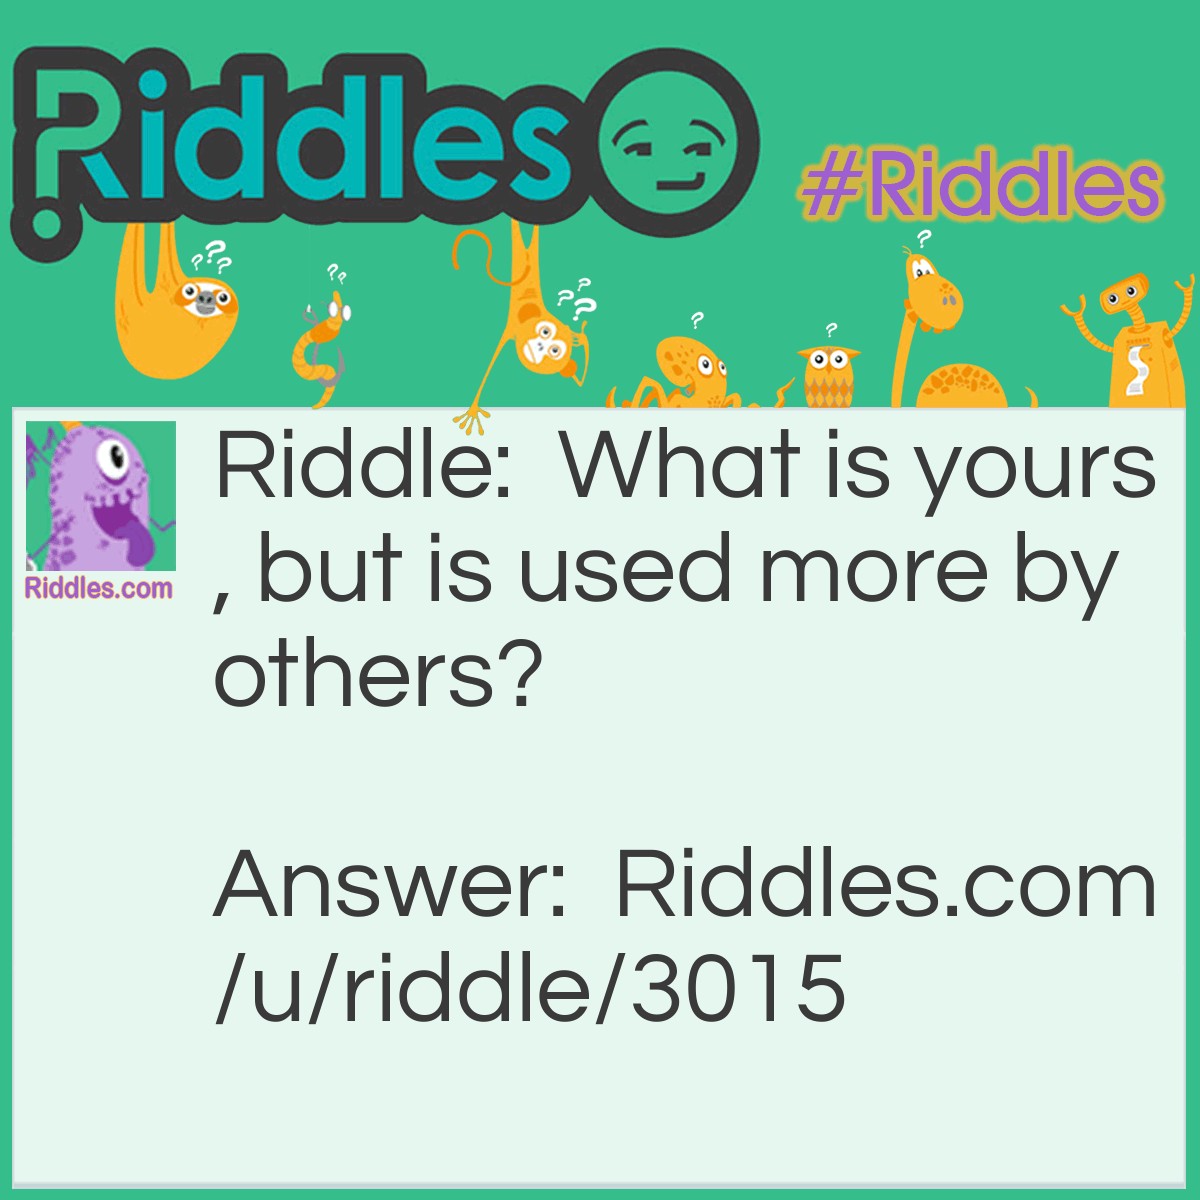 Riddle: What is yours, but is used more by others? Answer: Your name.